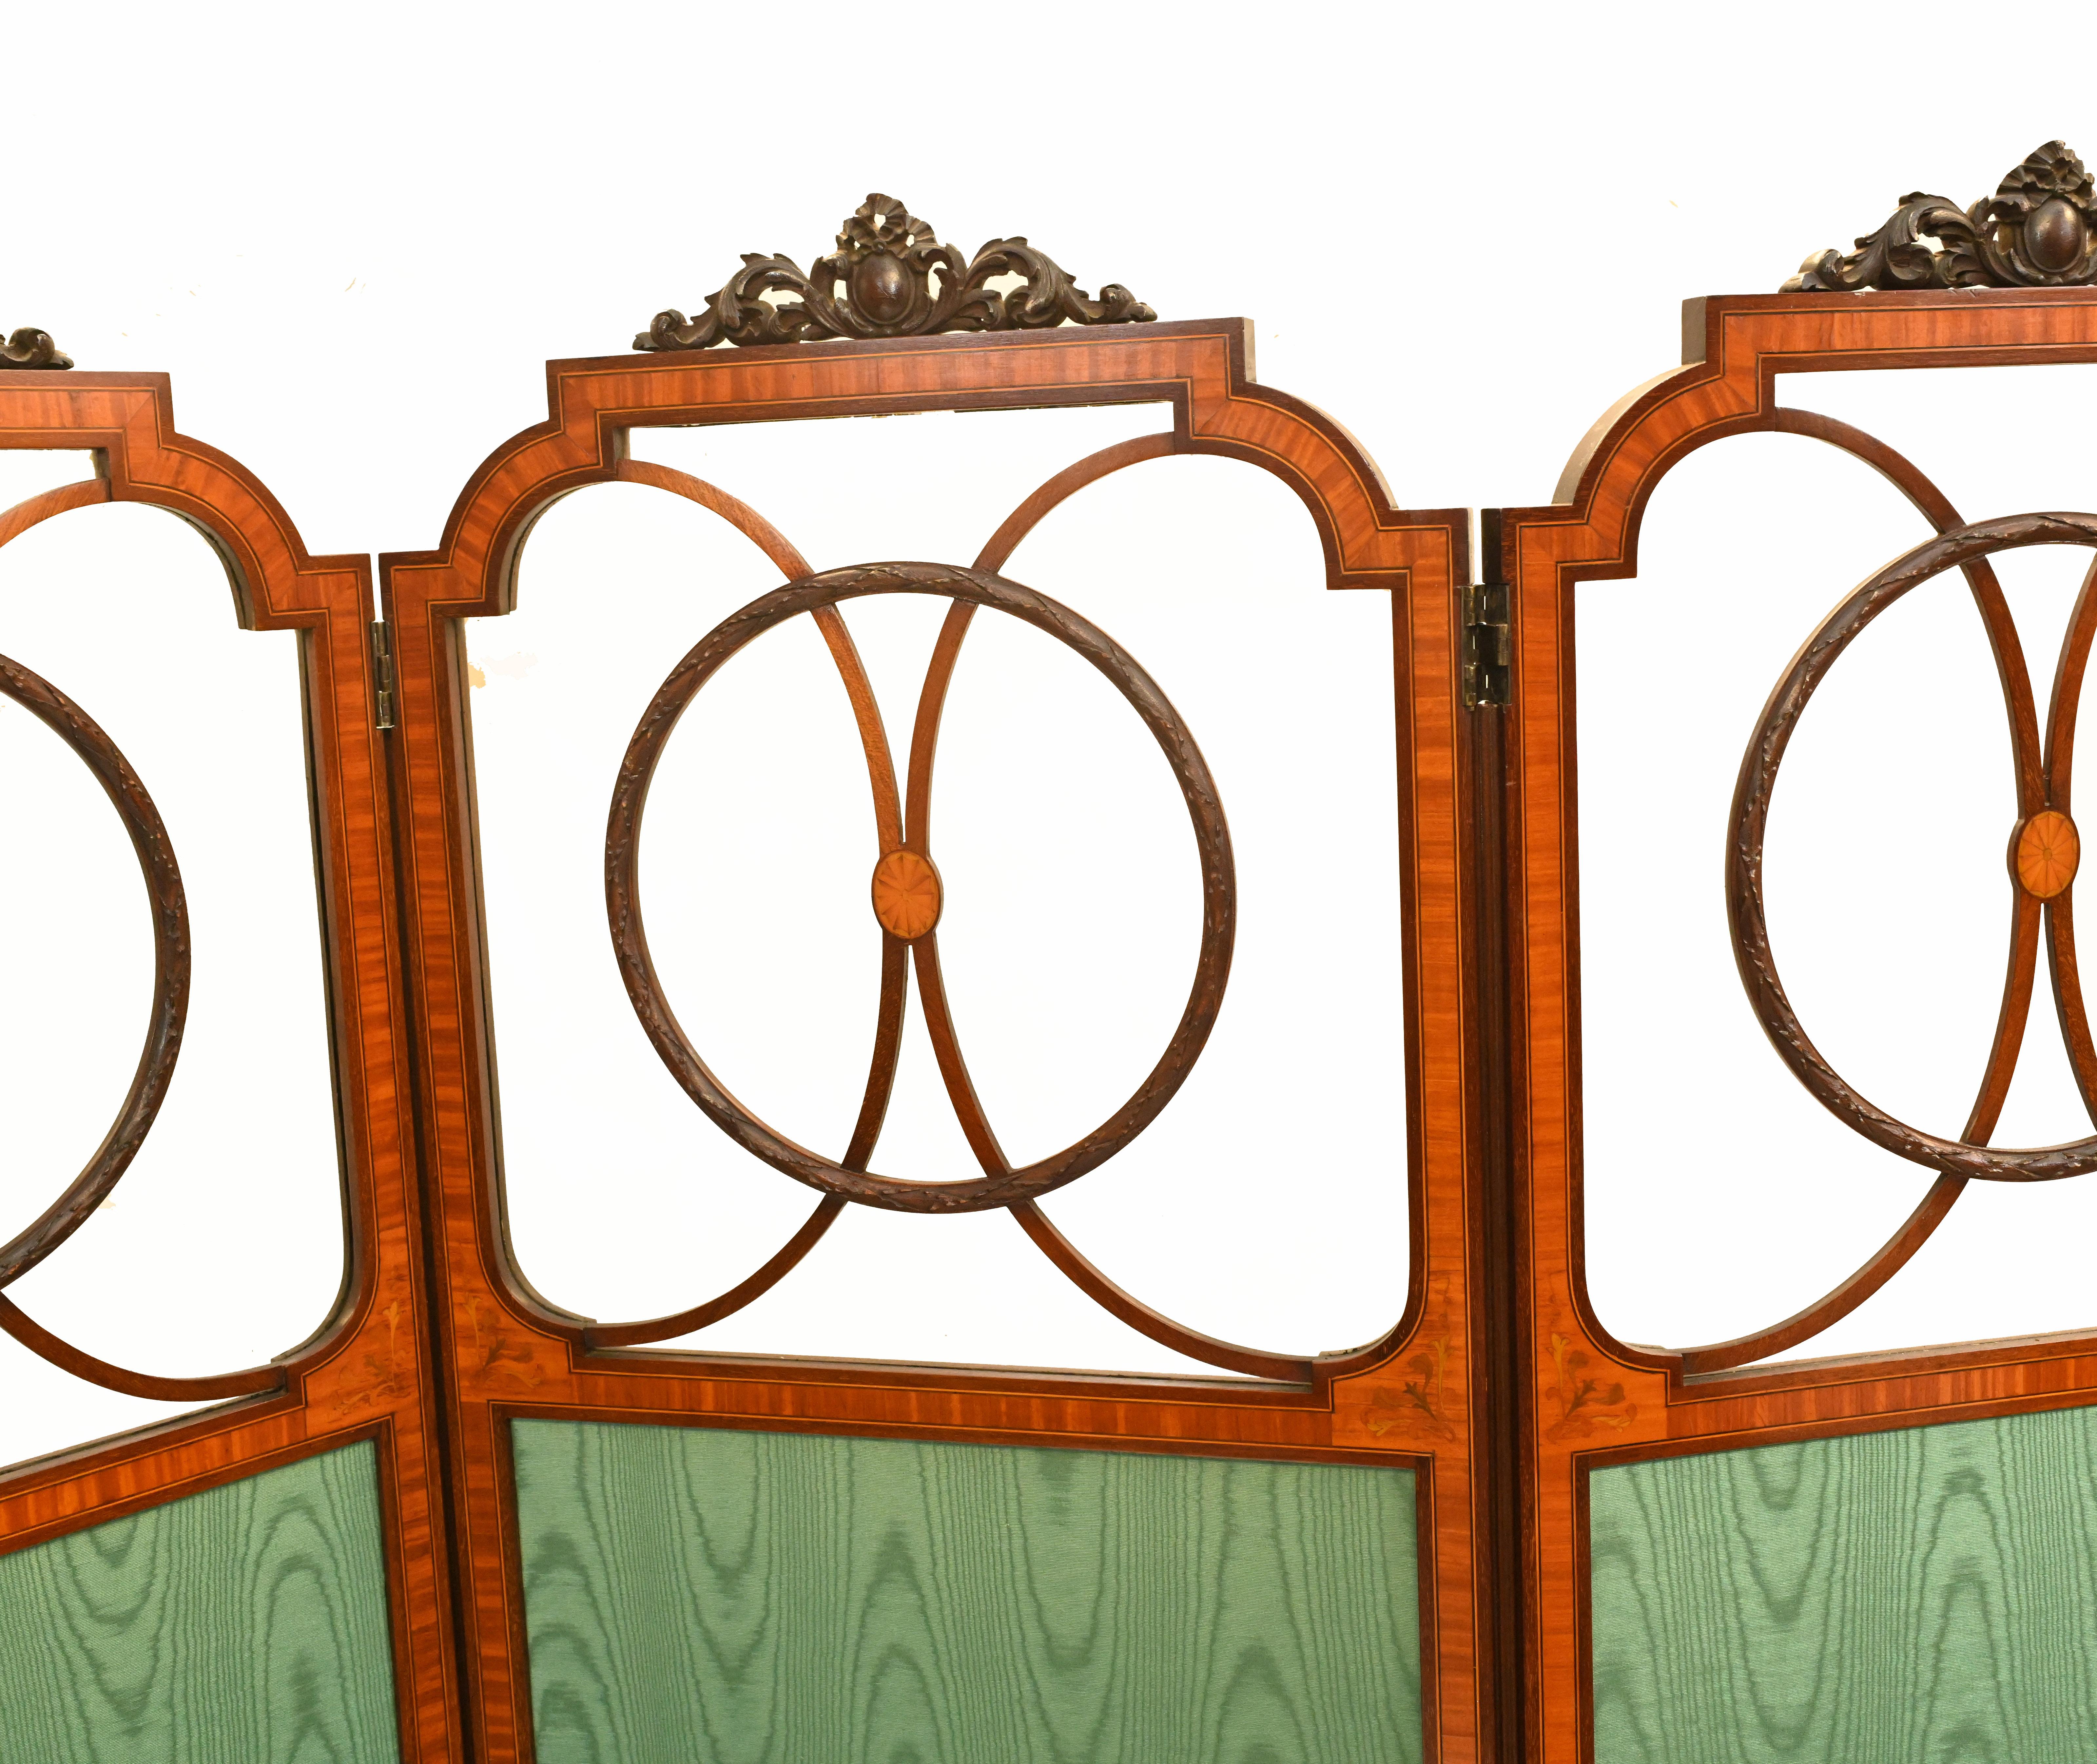 Early 20th Century Edwardian Screen Four Panel Room Divider Satinwood 1910